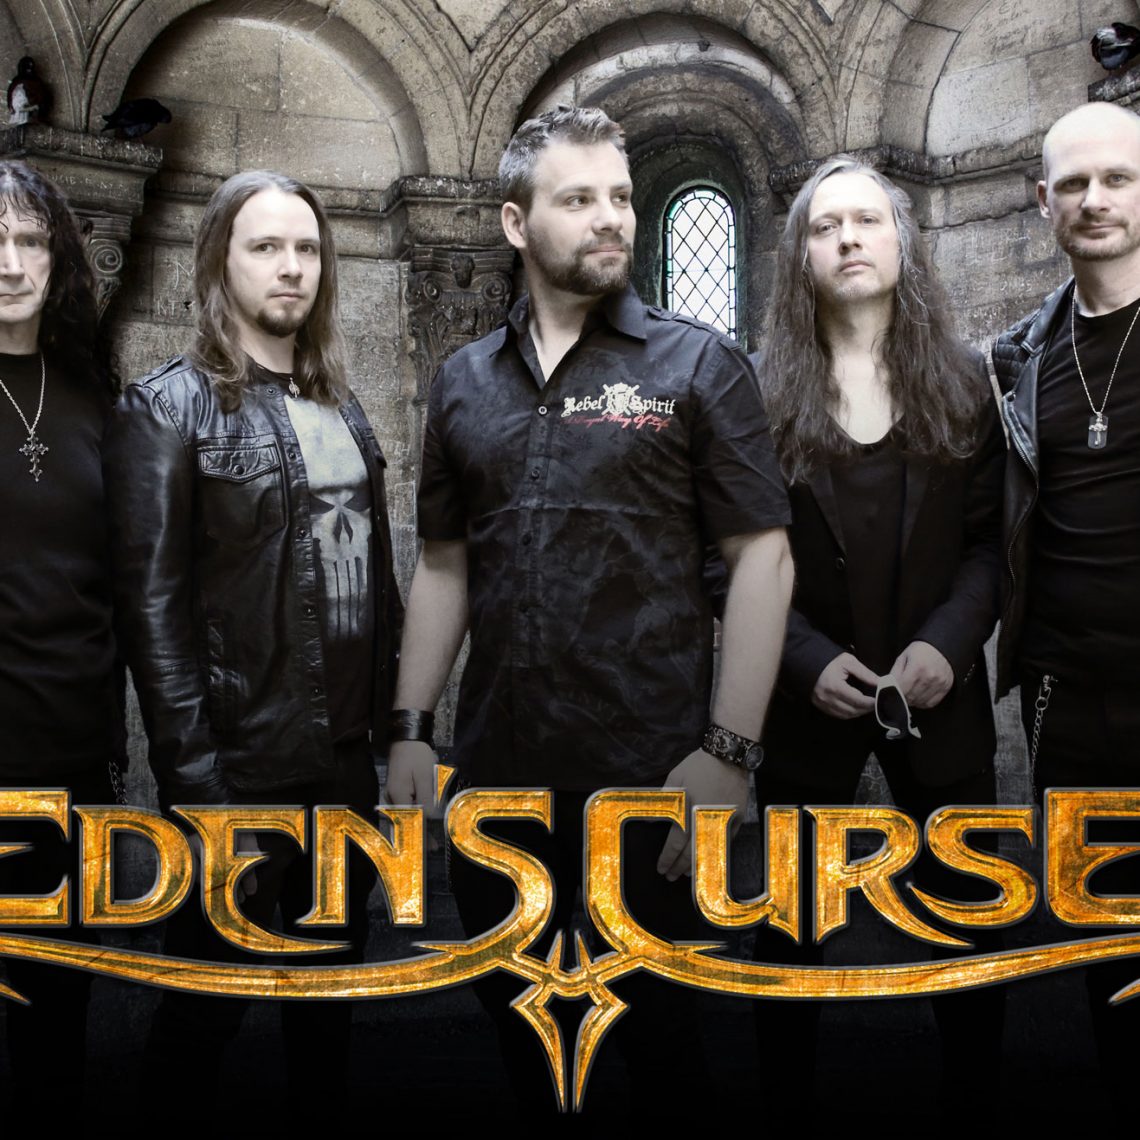 EDEN’S CURSE TEAM UP WITH MOB RULES & DEGREED FOR UK TOUR